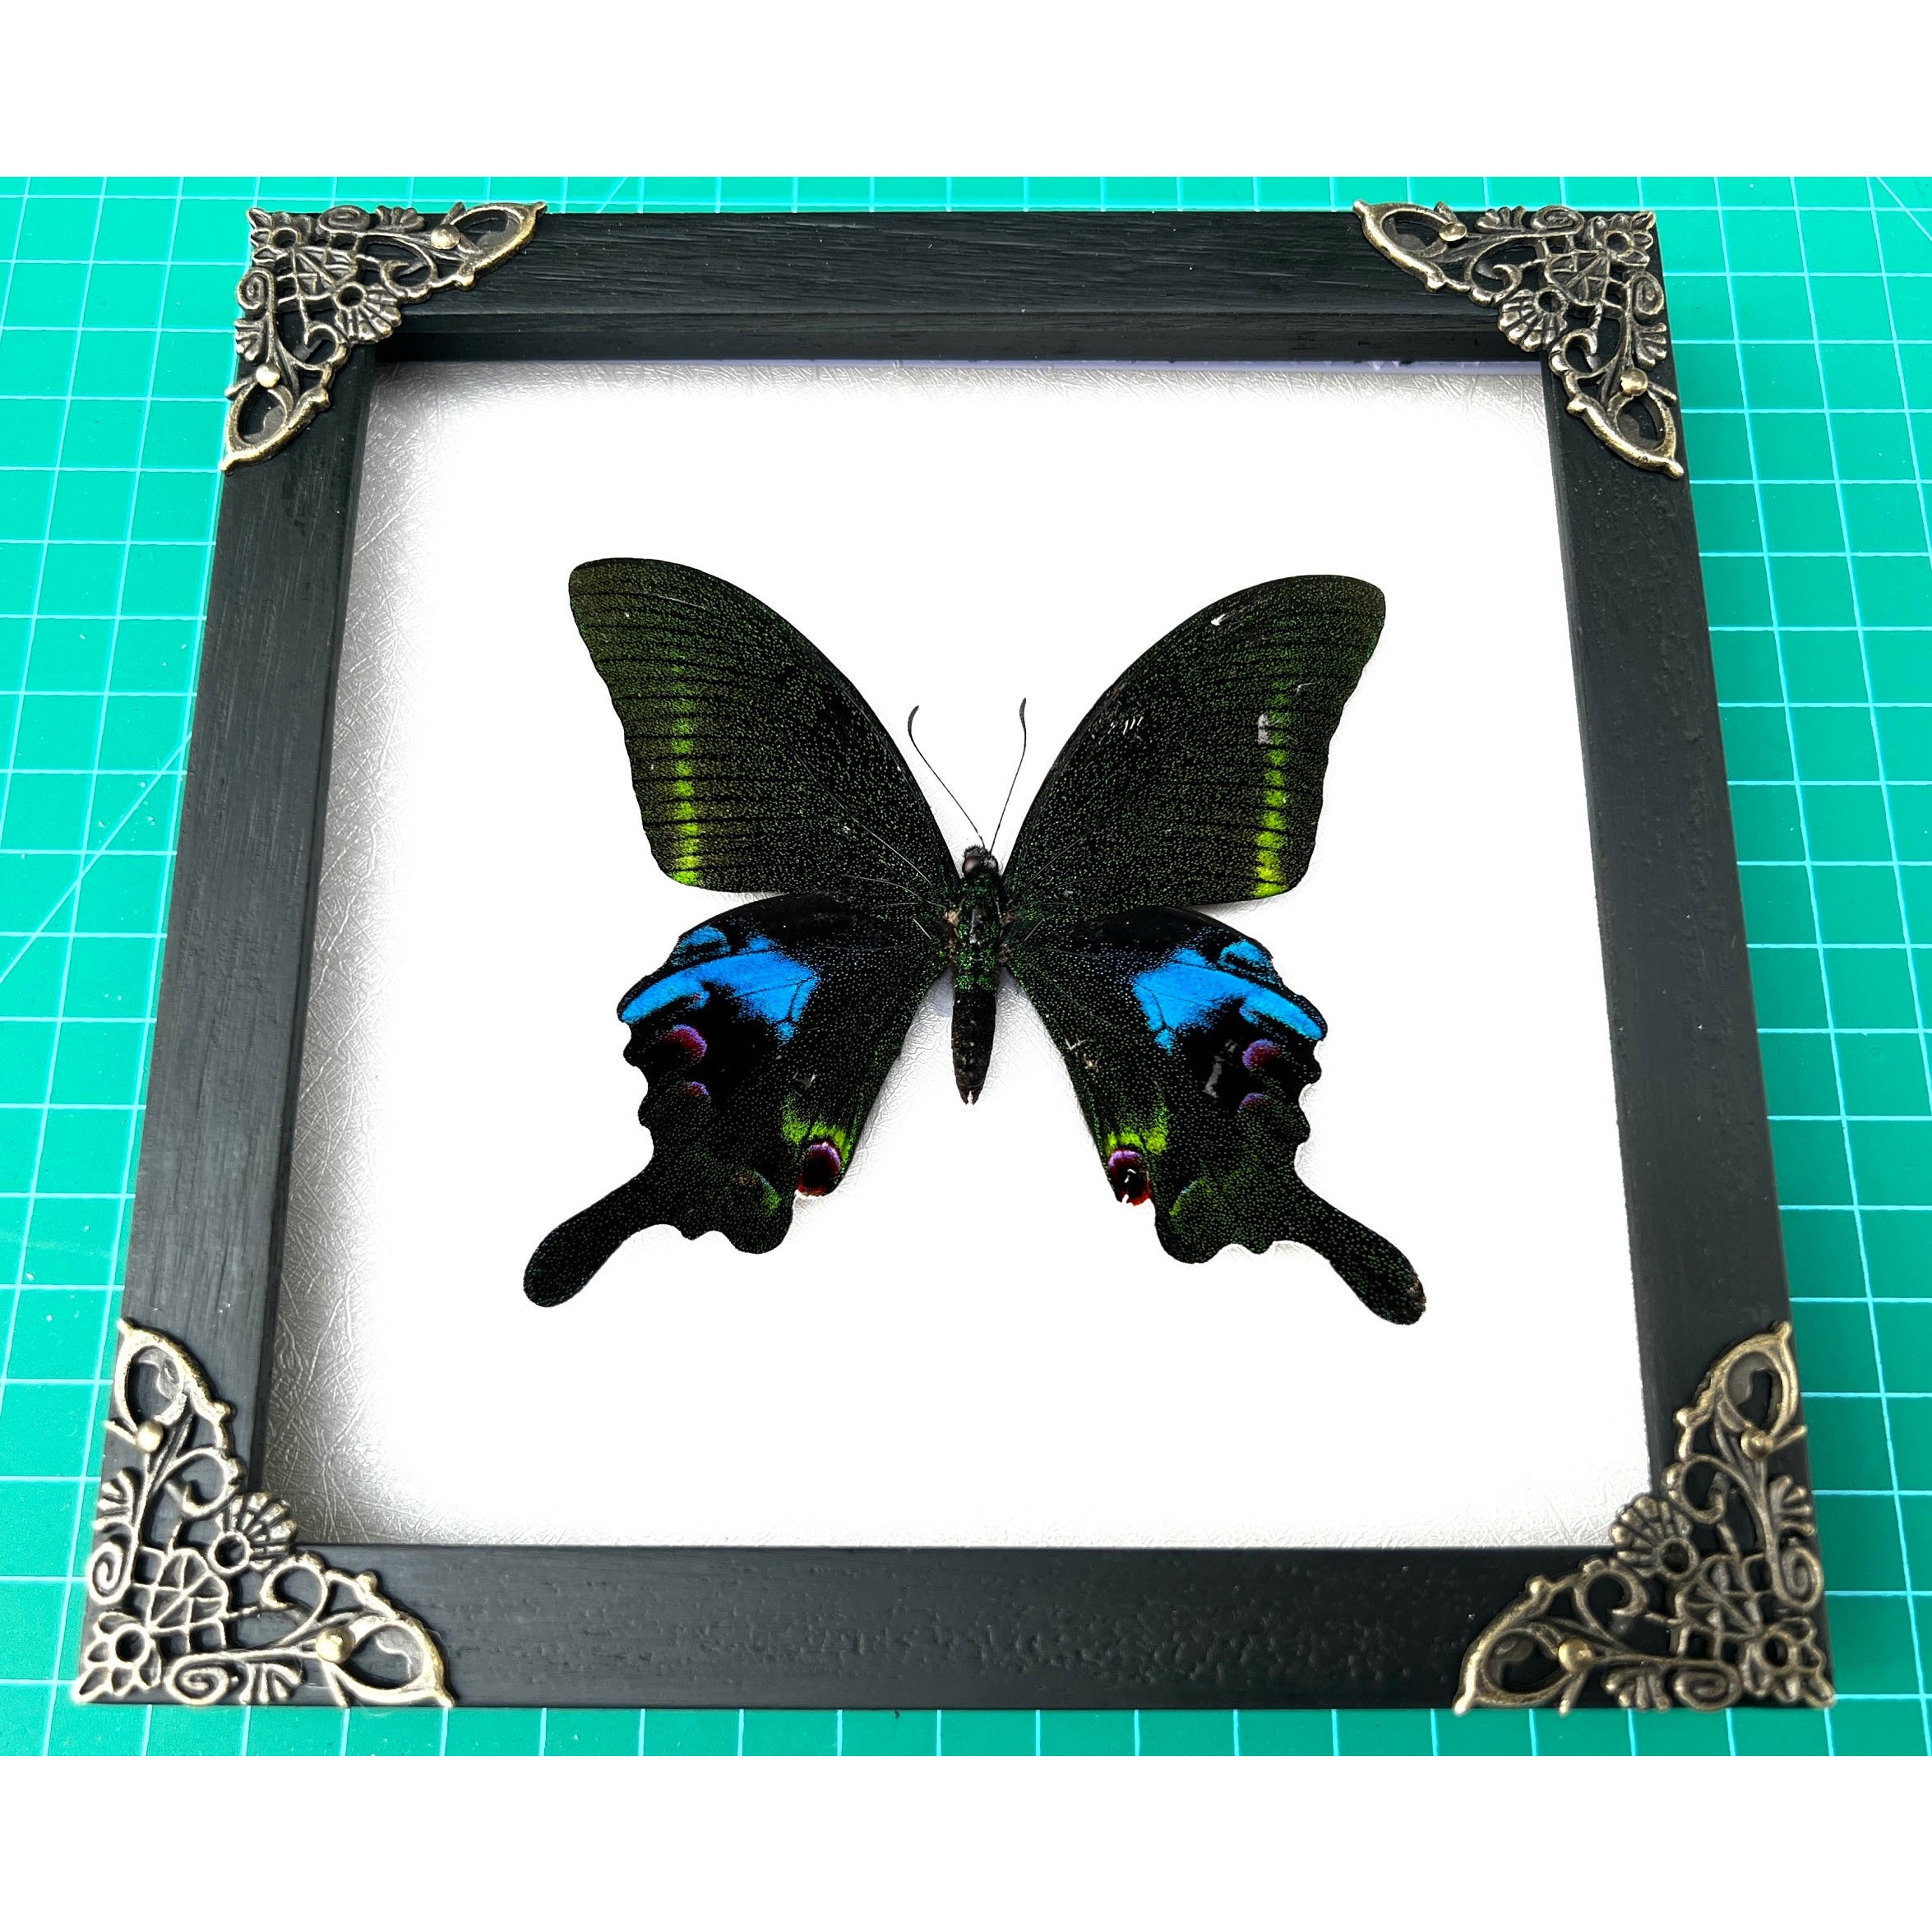 Real Framed Butterfly Moth Dead Insect Shadow Box Taxidermy Specimen Oddity Curiosities Tabletop Wall Art Hanging Collection Home Decor Living Gallery K16-15-TR - Vinacreations